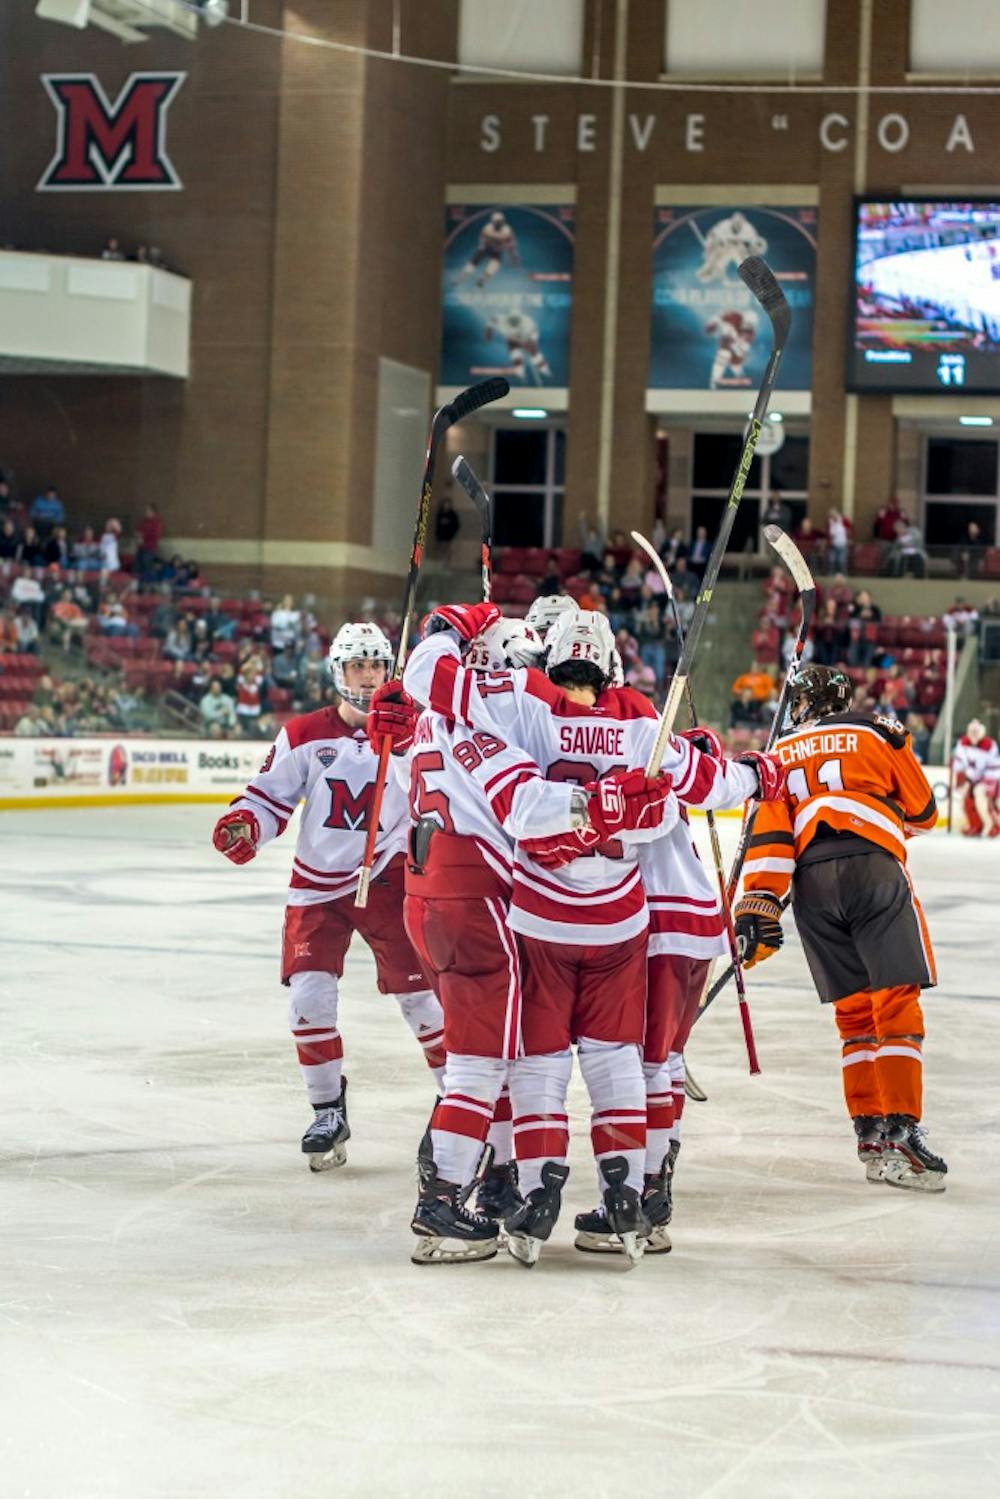 Five RedHawks celebrate against Bowling Green at the Goggin Ice Center Sunday. In his first year as head coach, Chris Bergeron is trying to create a new culture.